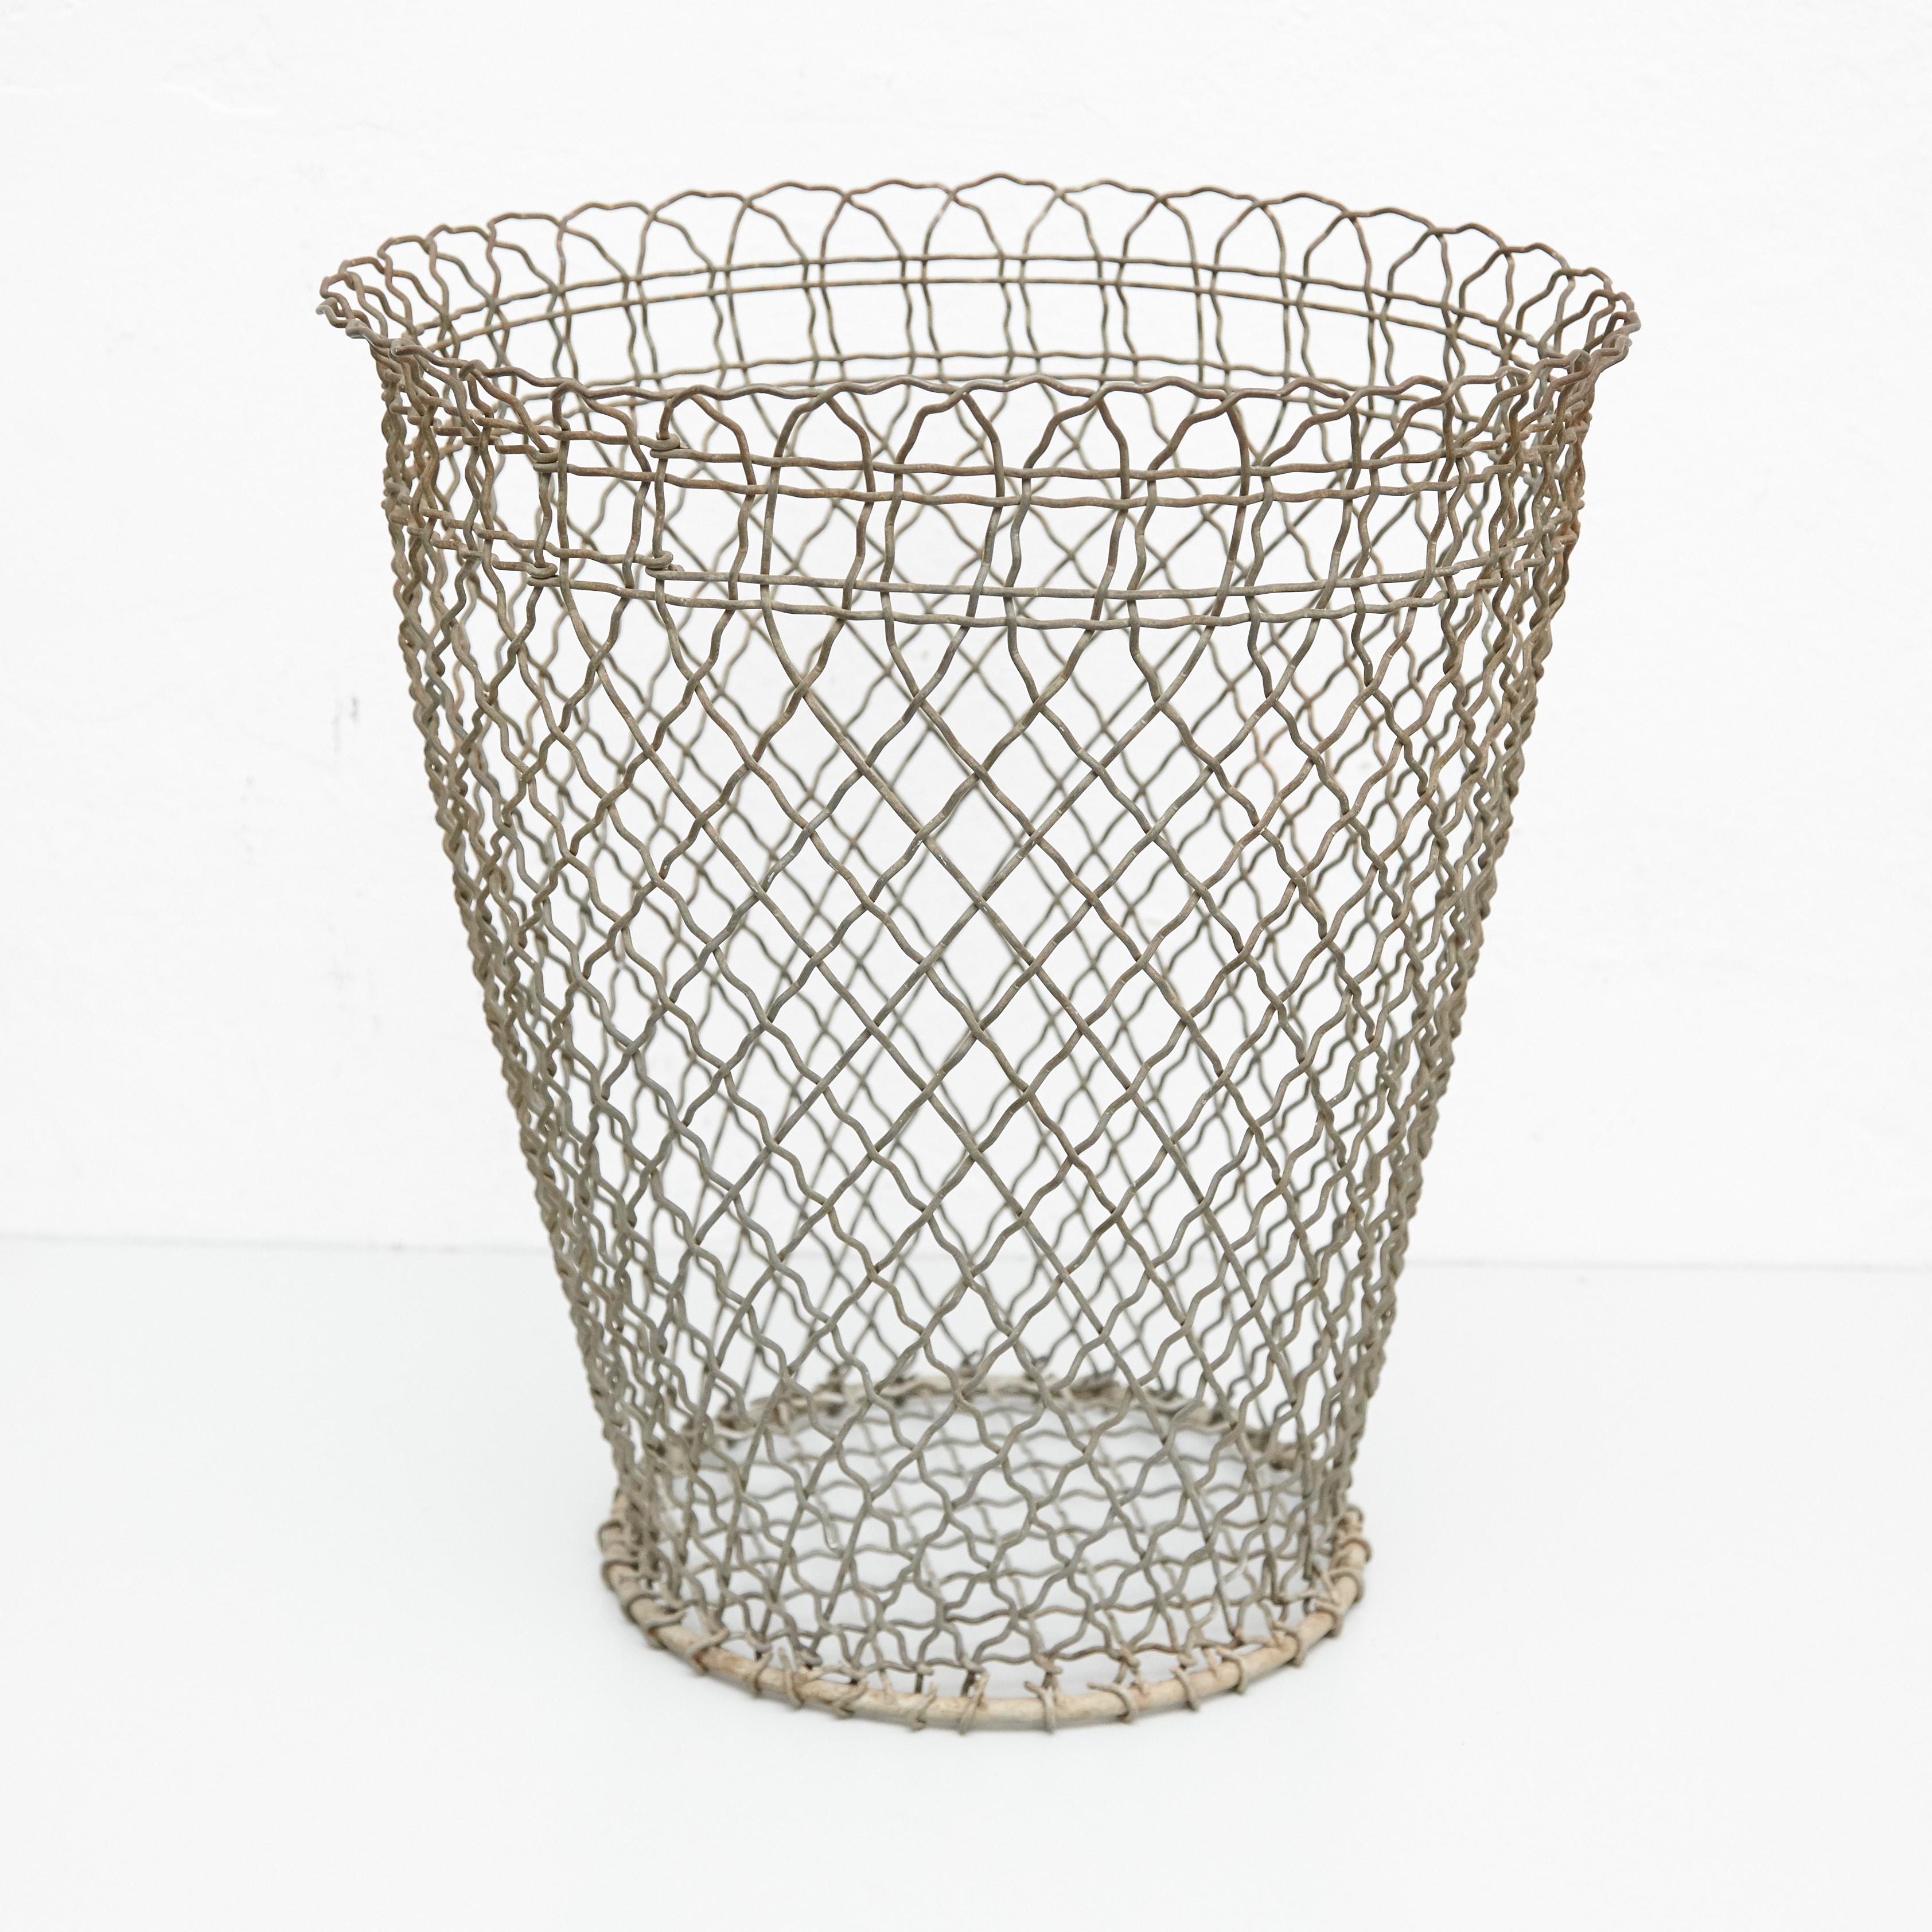 Metal paper bin made by wire woven in a Classic cross-hatched pattern completed by a solid ring. 
Unknown manufacturer, France,
circa 1940

Materials:
Metal

Dimensions: 
Diameter 40 x 45 height cm

In original condition, with minor wear